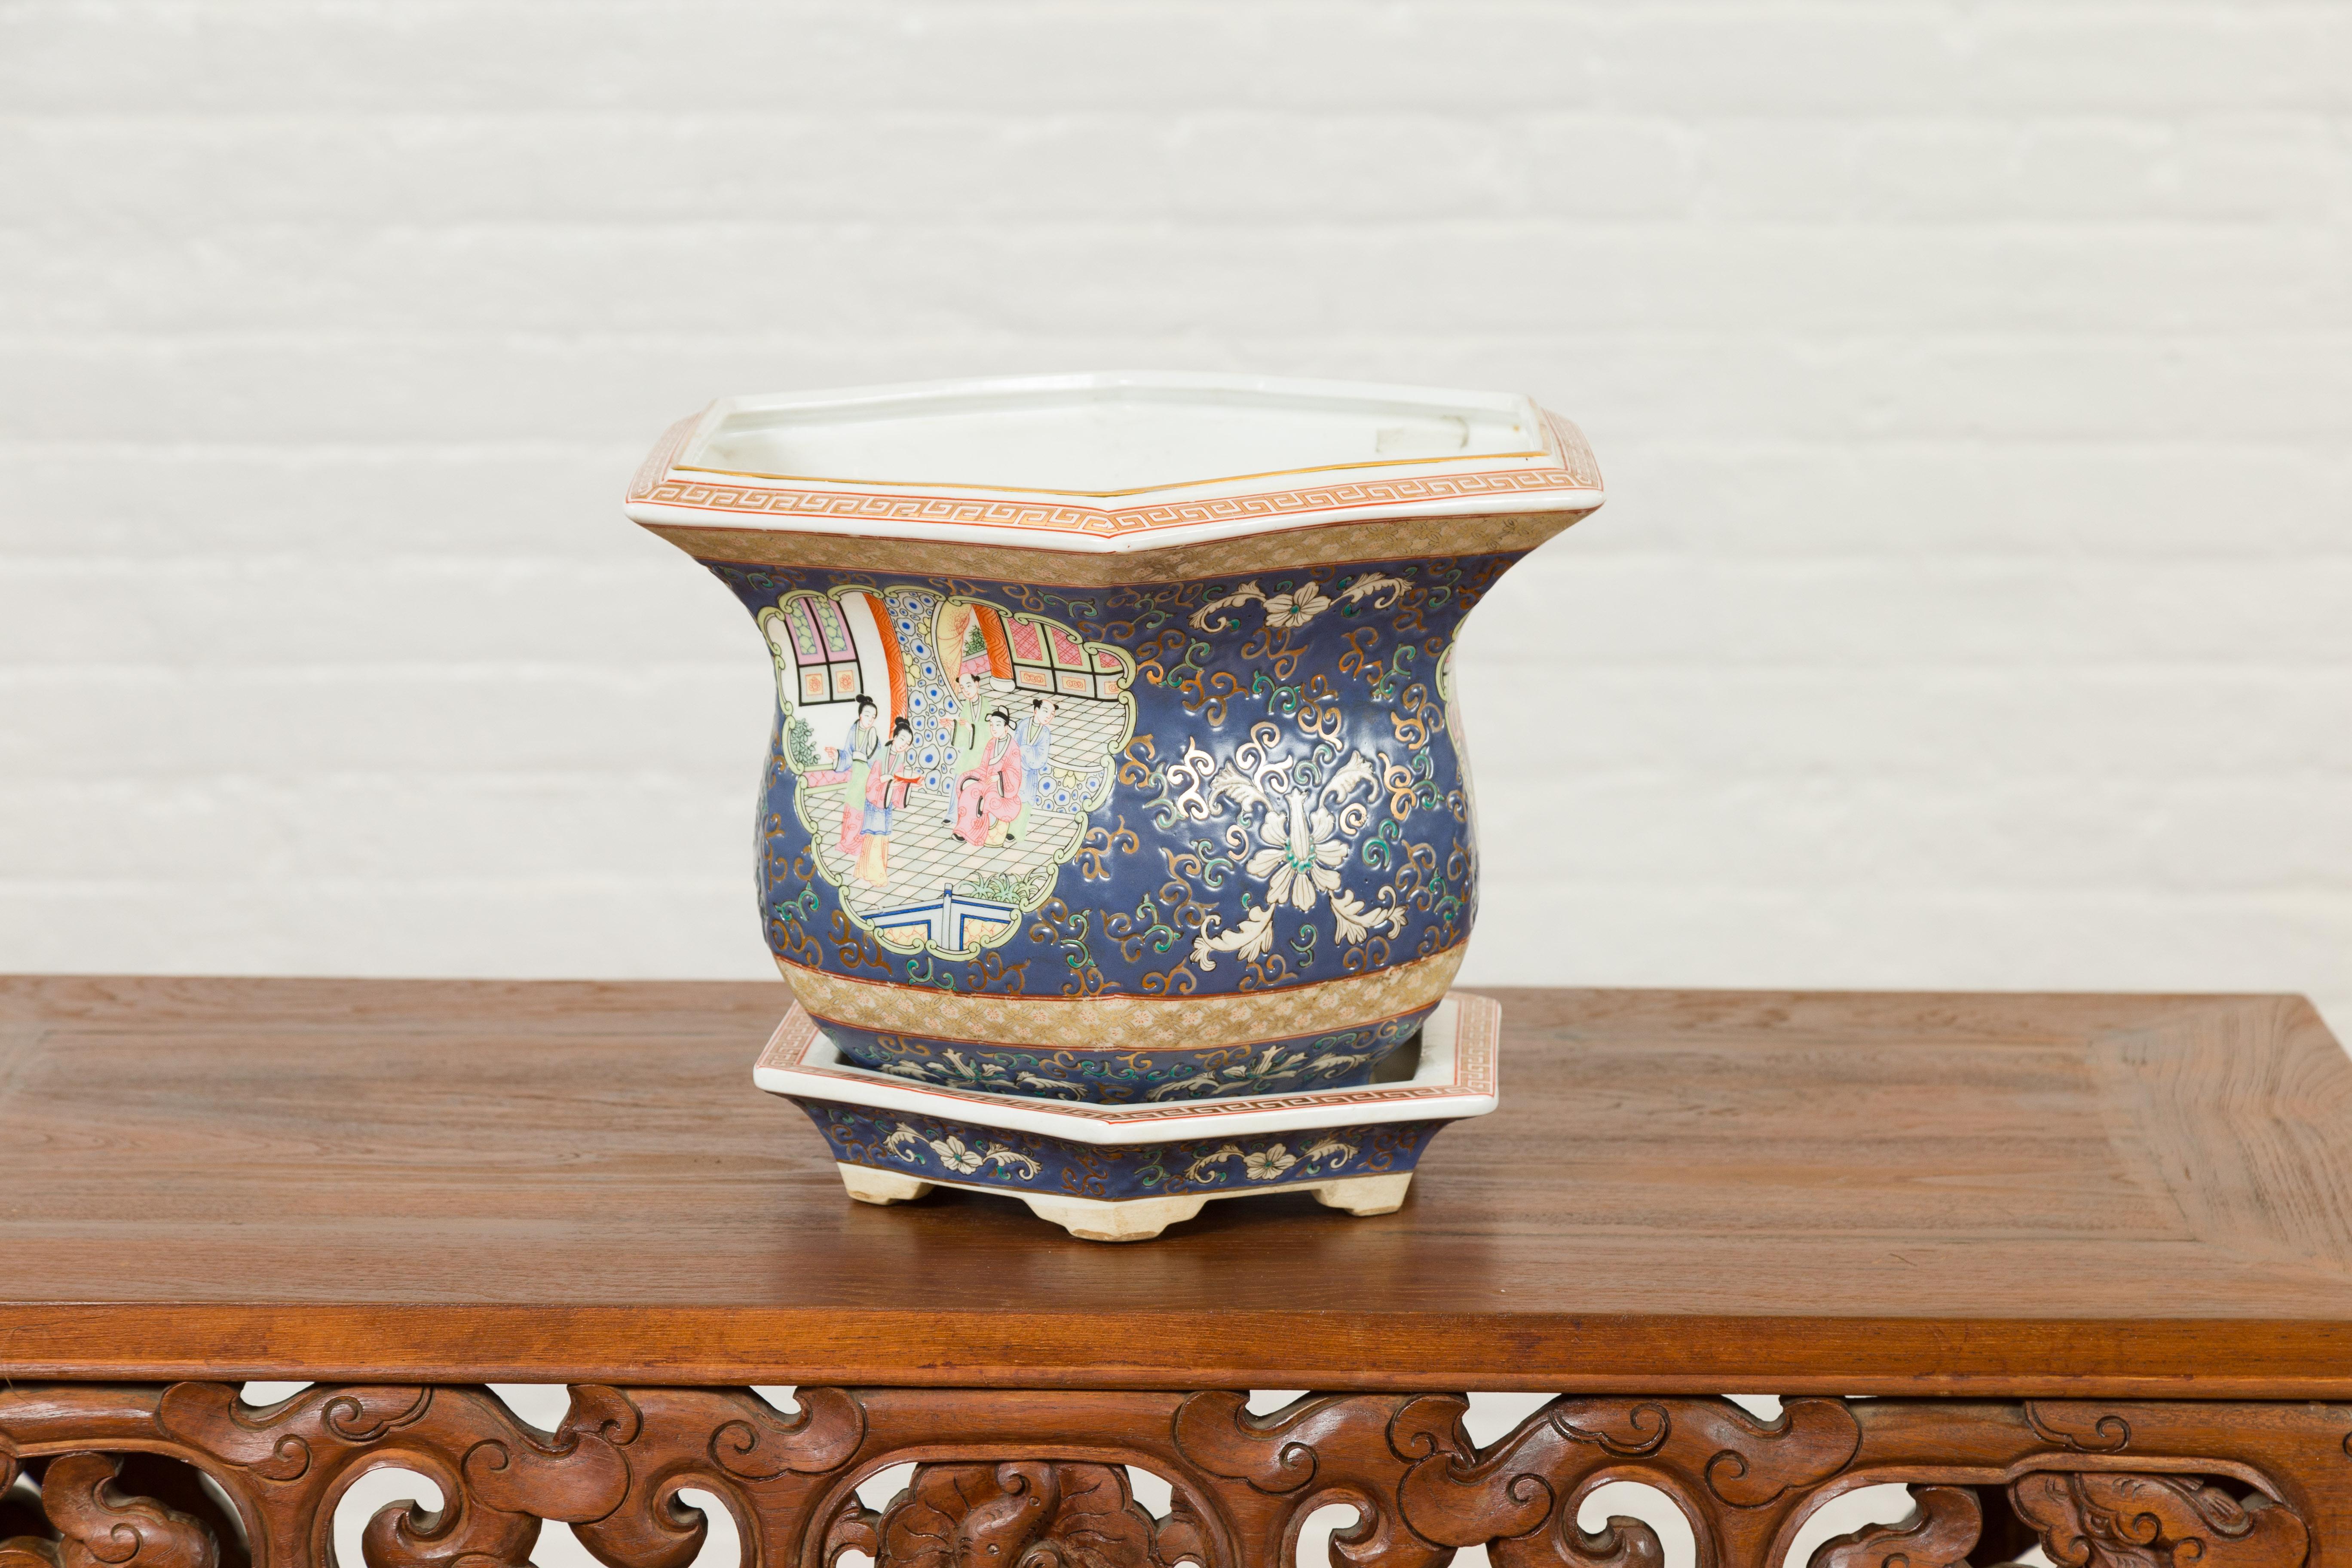 Chinese Hexagonal Planter with Hand Painted Courtyard Scenes Depicting Maidens 5